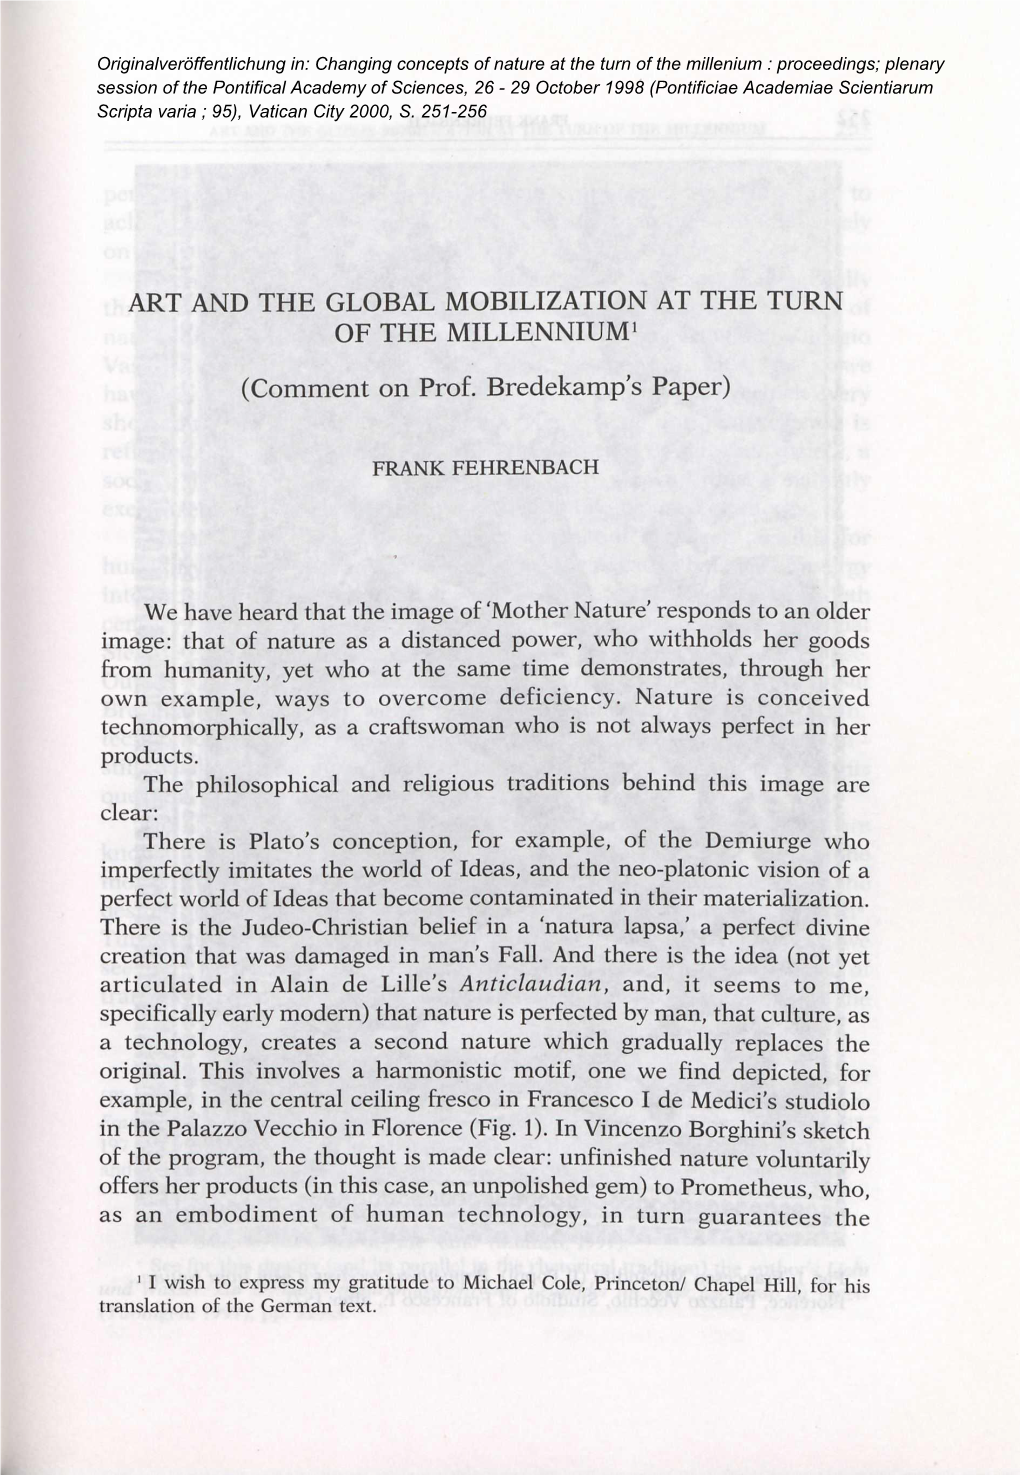 ART and the GLOBAL MOBILIZATION at the TURN of the MILLENNIUM (Comment on Prof. Bredekamp's Paper)